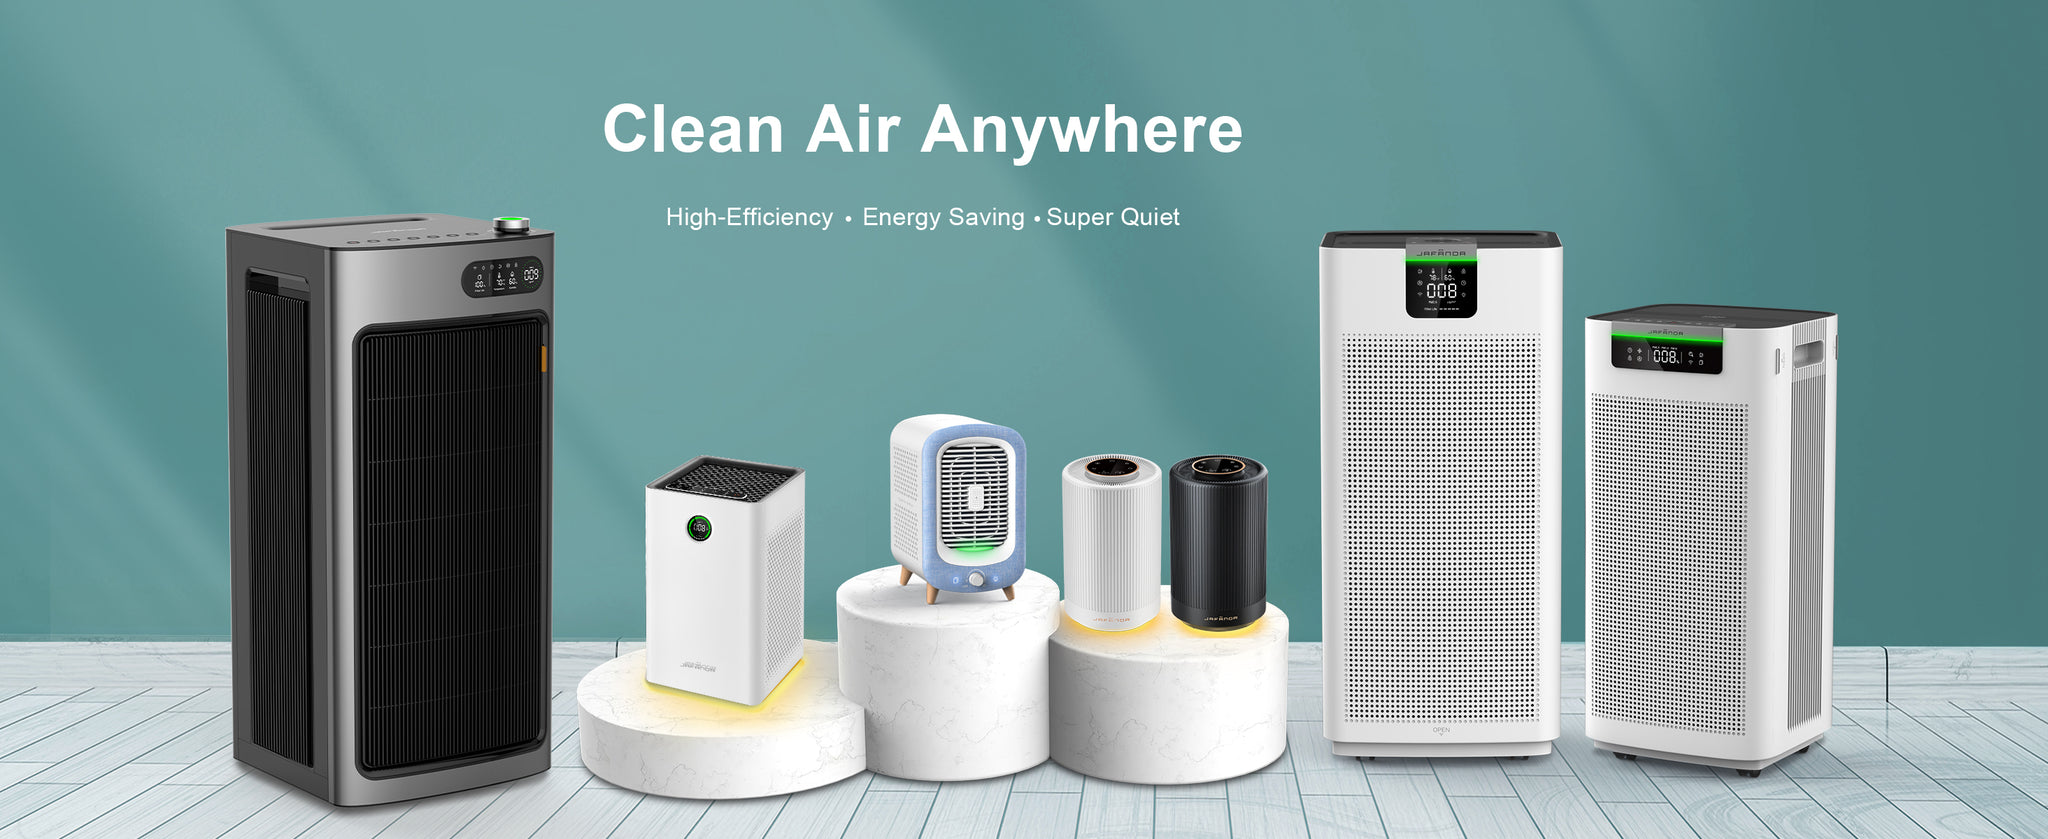 High-performance Jafanda Air Purifier, ensuring optimal indoor air quality and a healthier living environment.